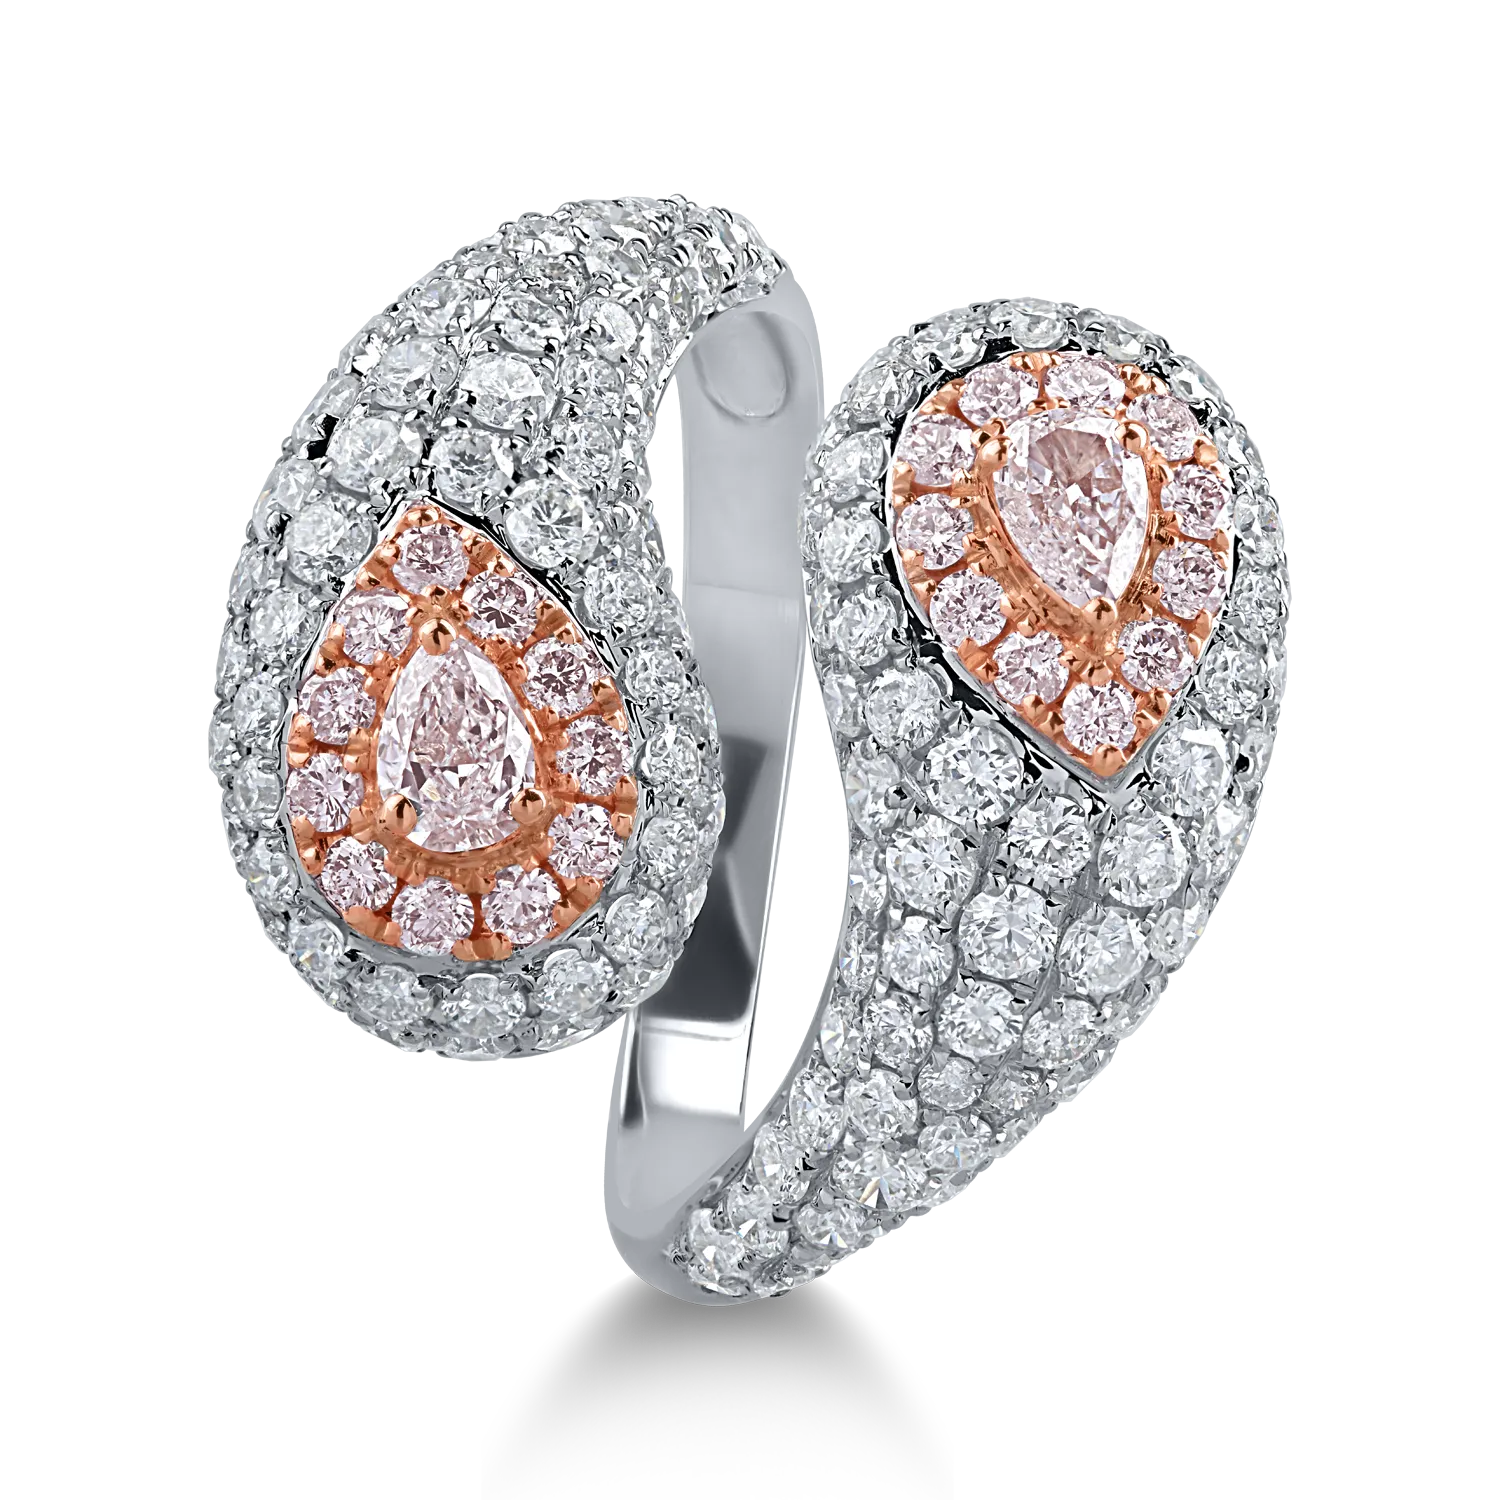 White-rose gold ring with 2.09ct clear diamonds and 0.59ct rose diamonds